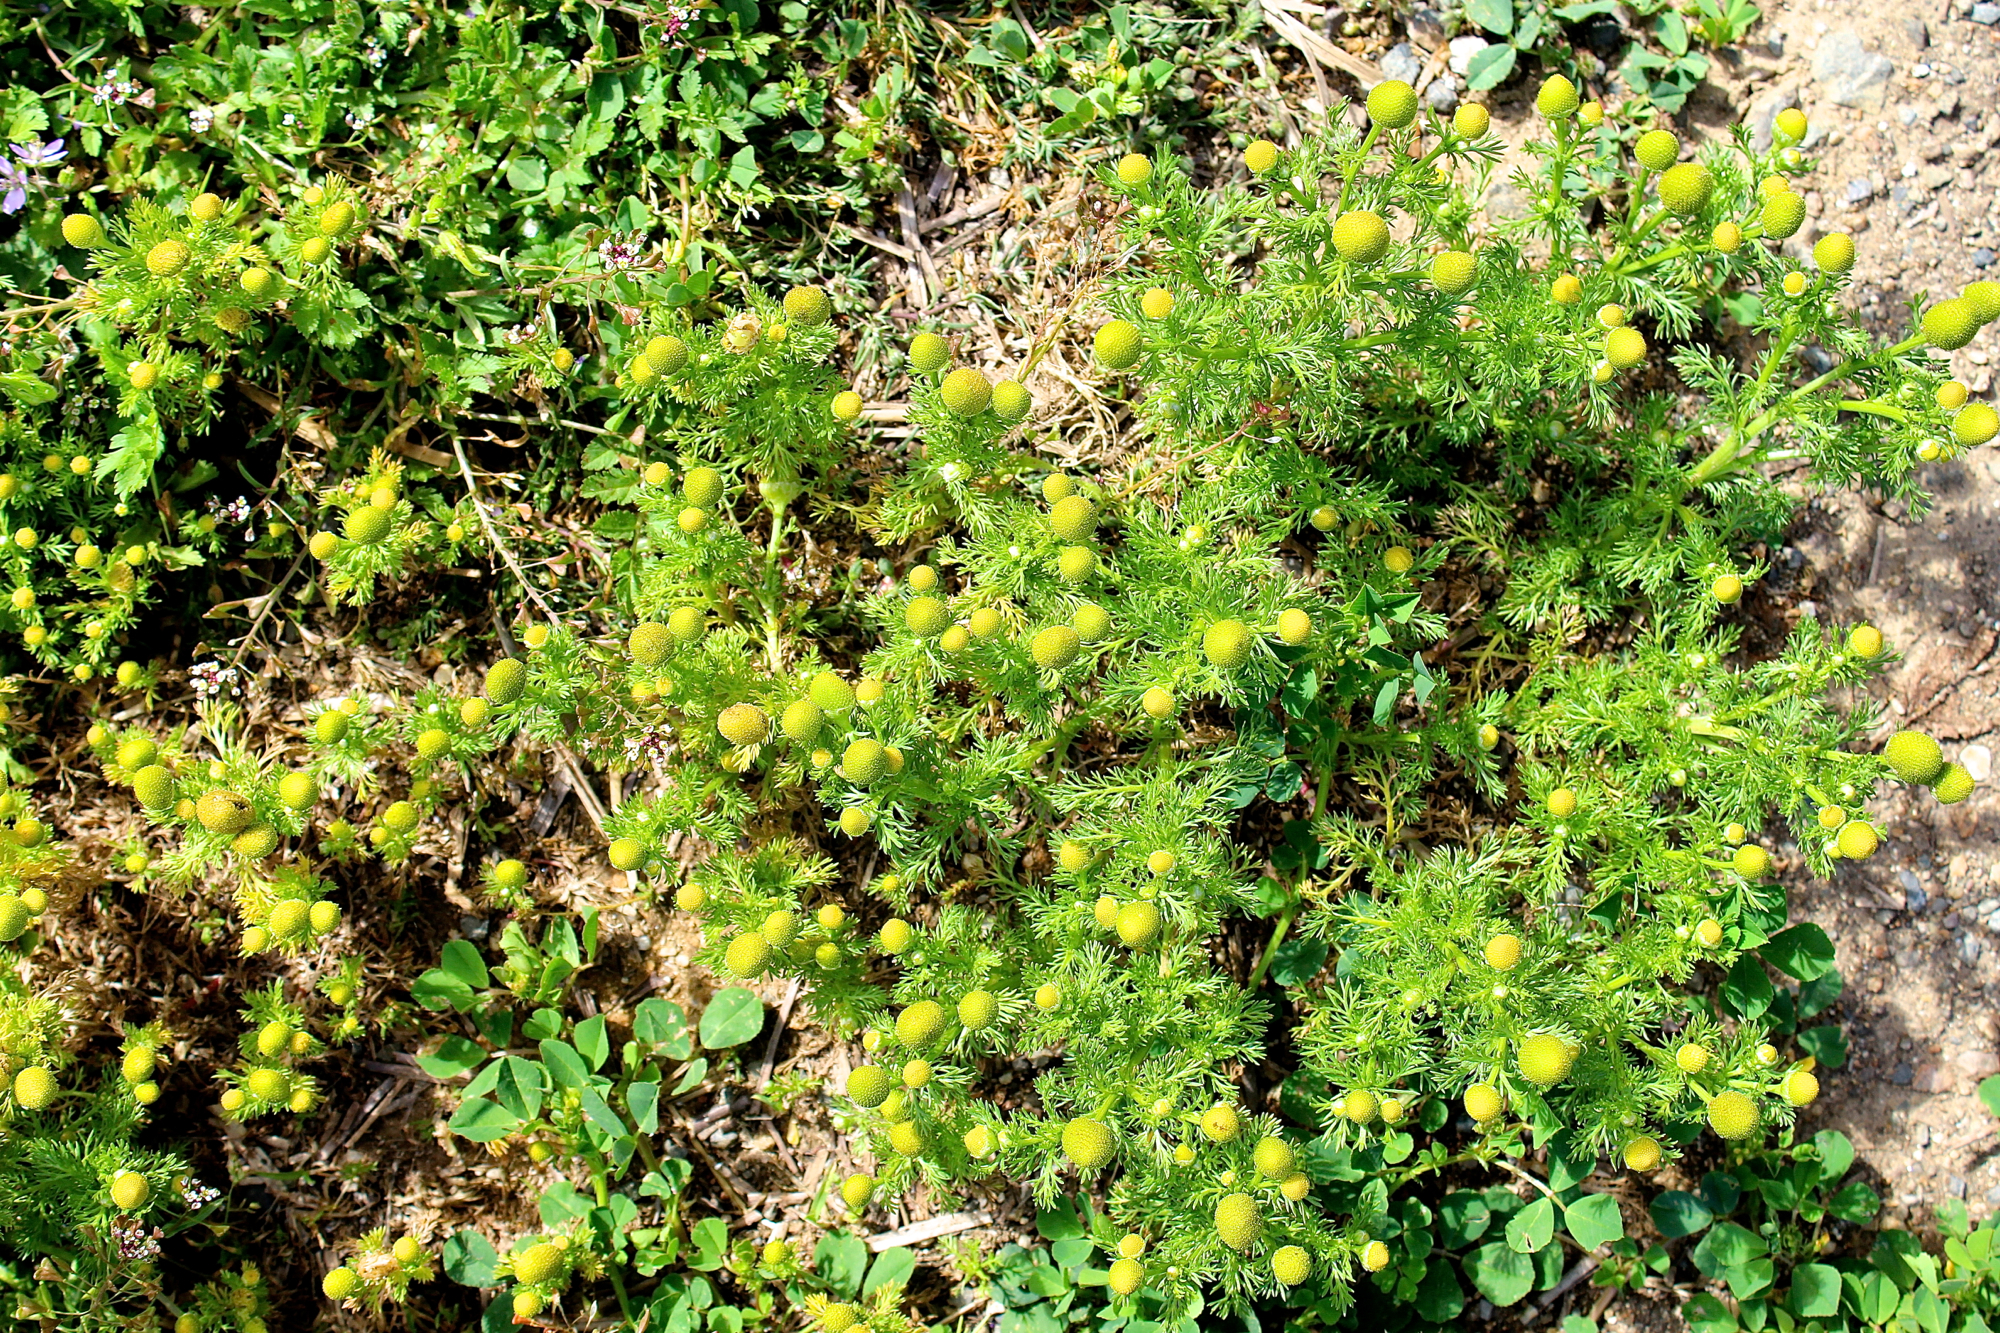 Abundant pineapple weed at the Peralta Community Garden - the members had no problem with my taking as much as I wanted.